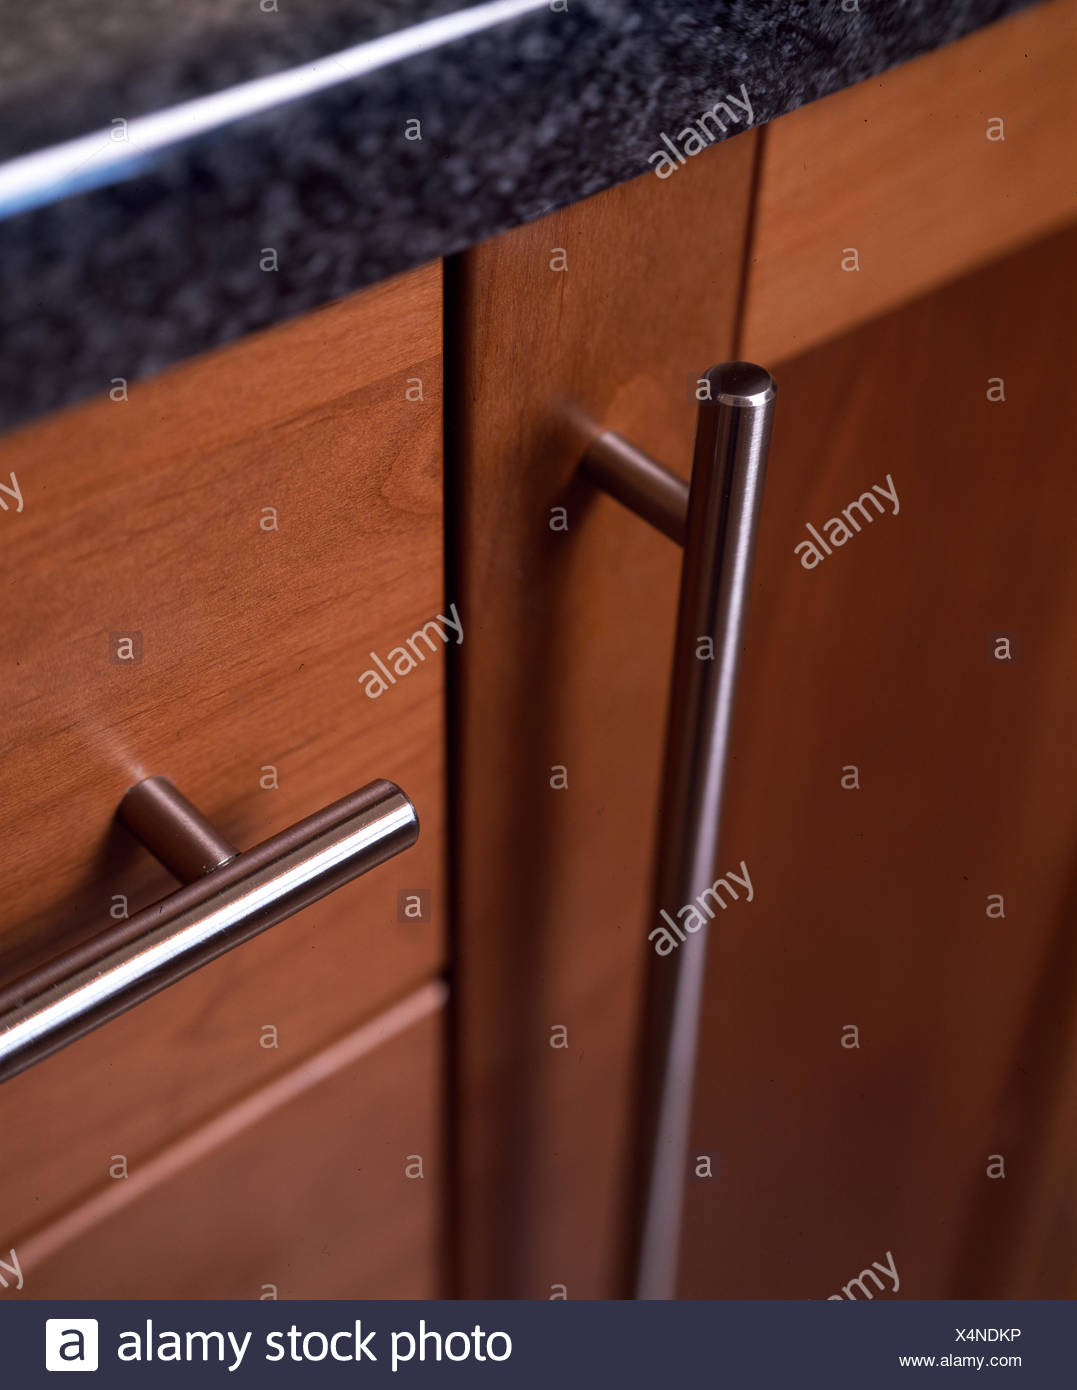 Closeup Of Kitchen Cabinet With Stainless Steel Handles Stock